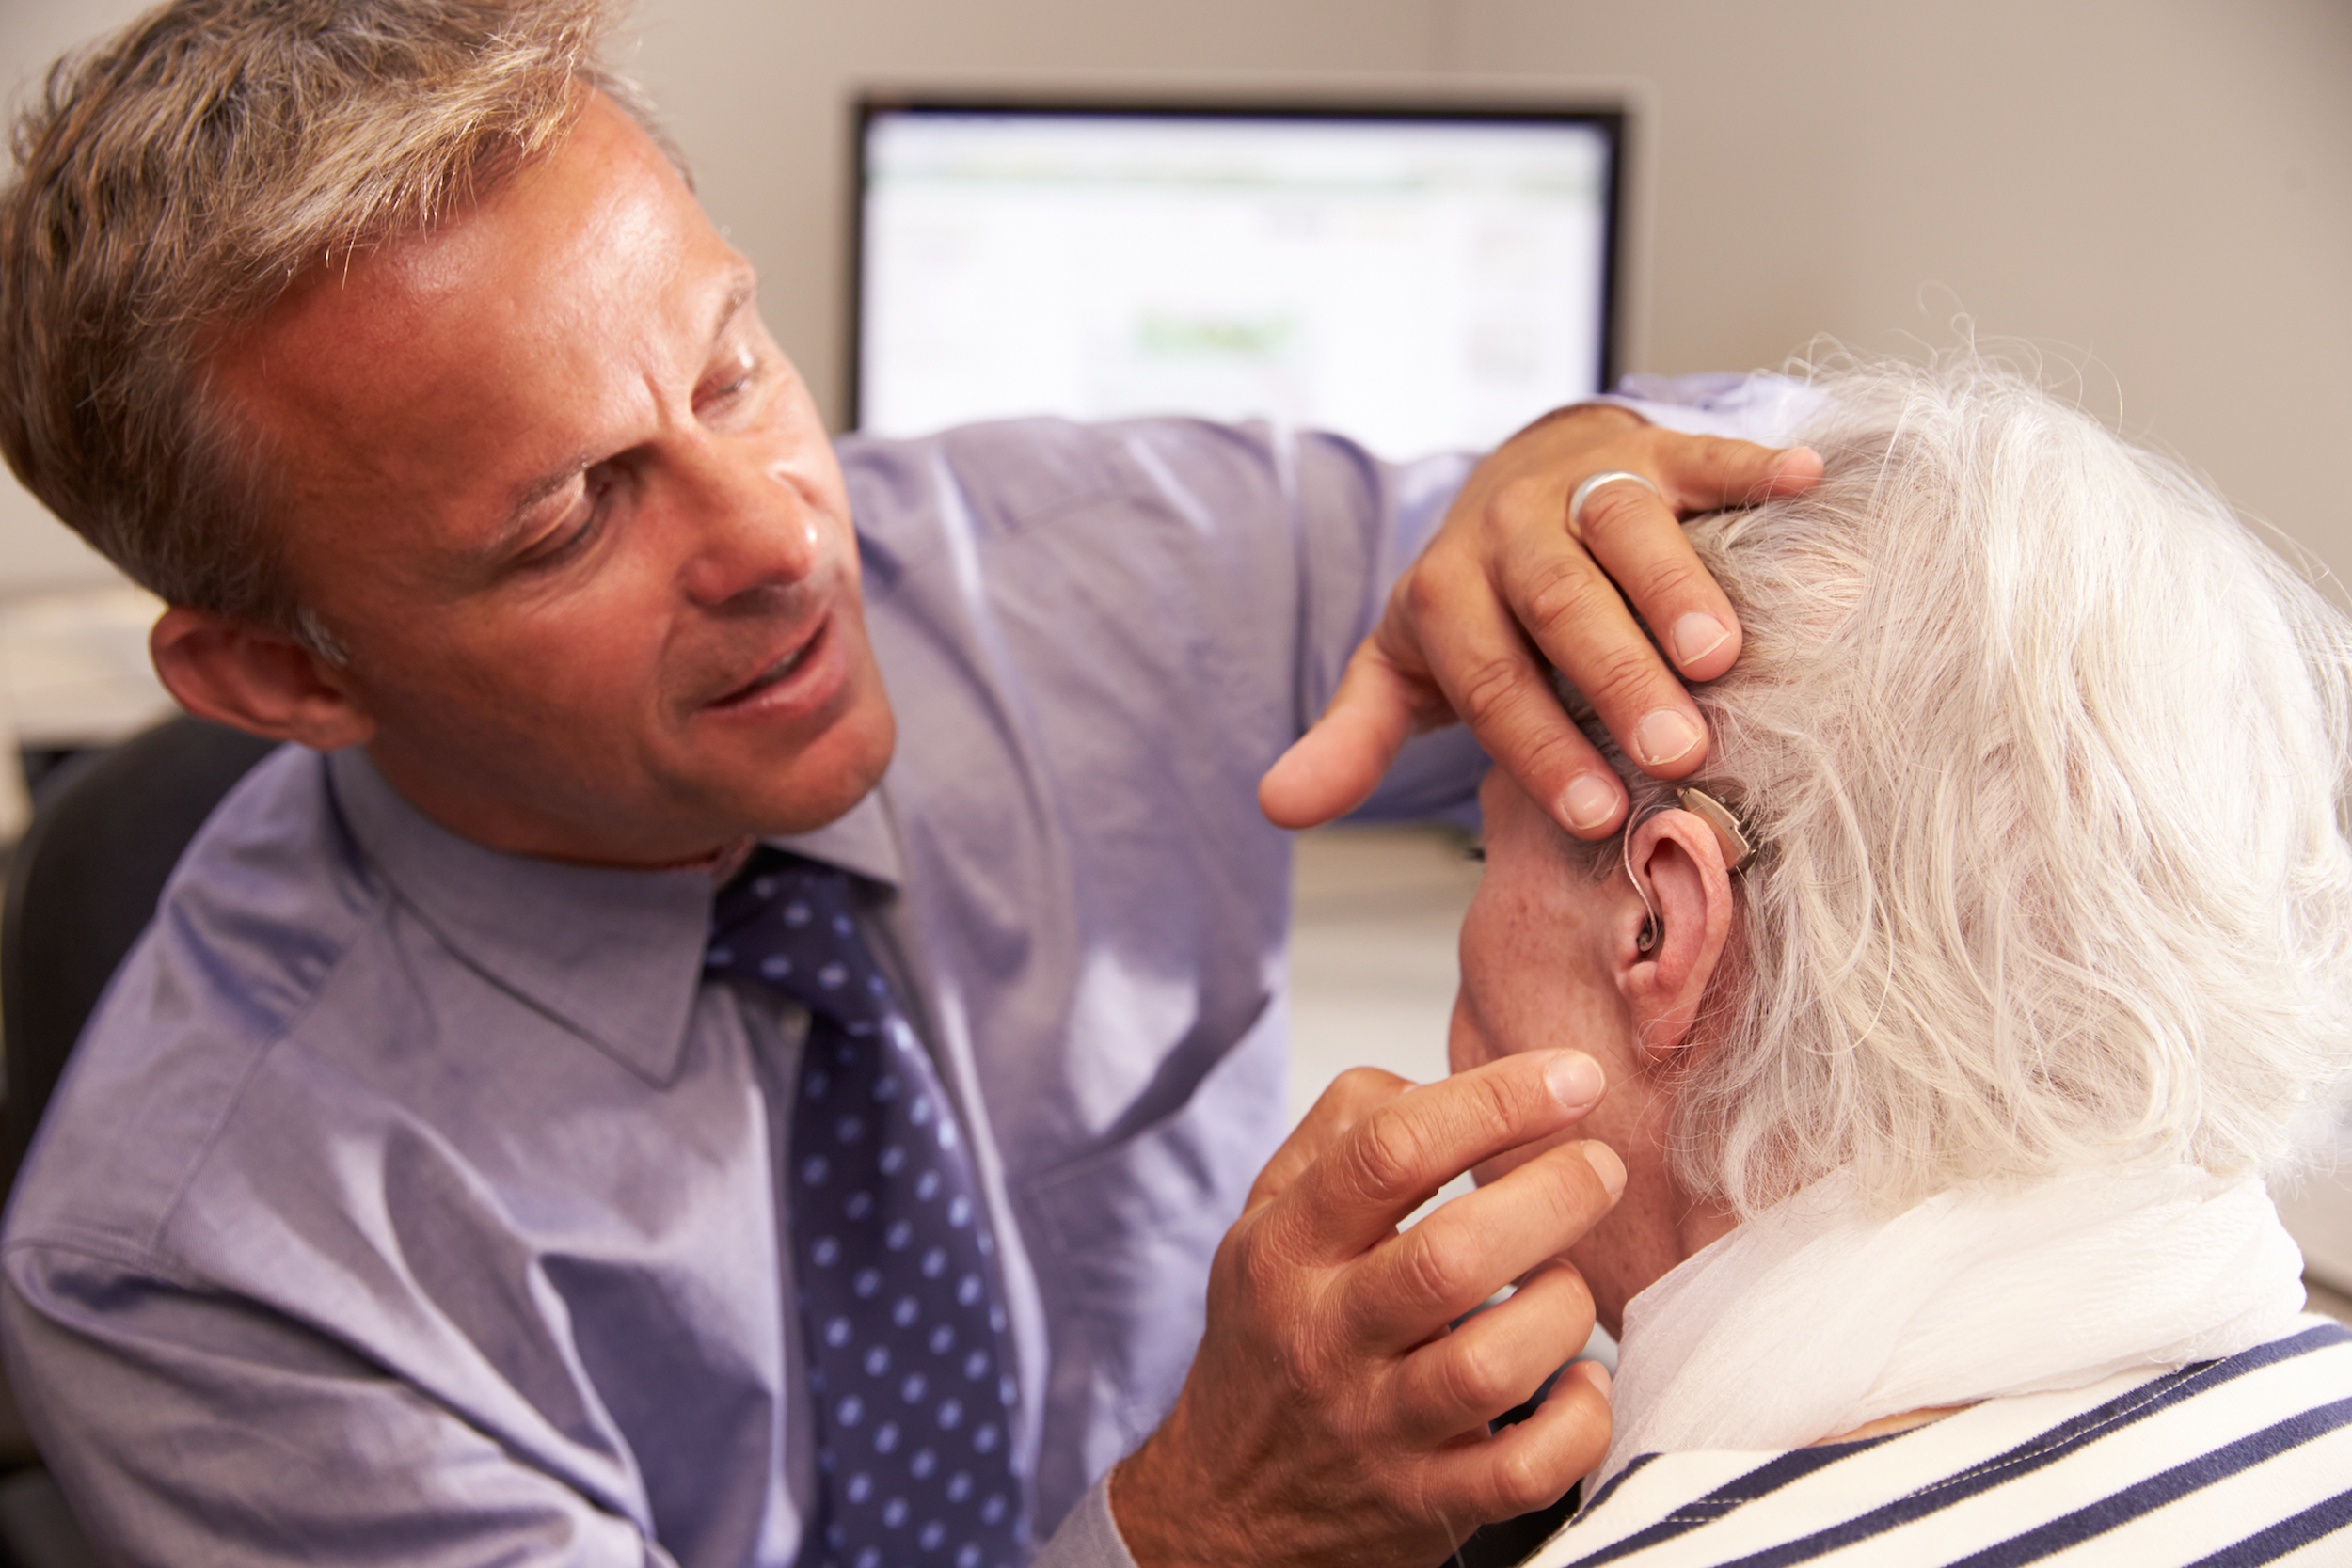 Auditory impairment a precursor to Alzheimers?